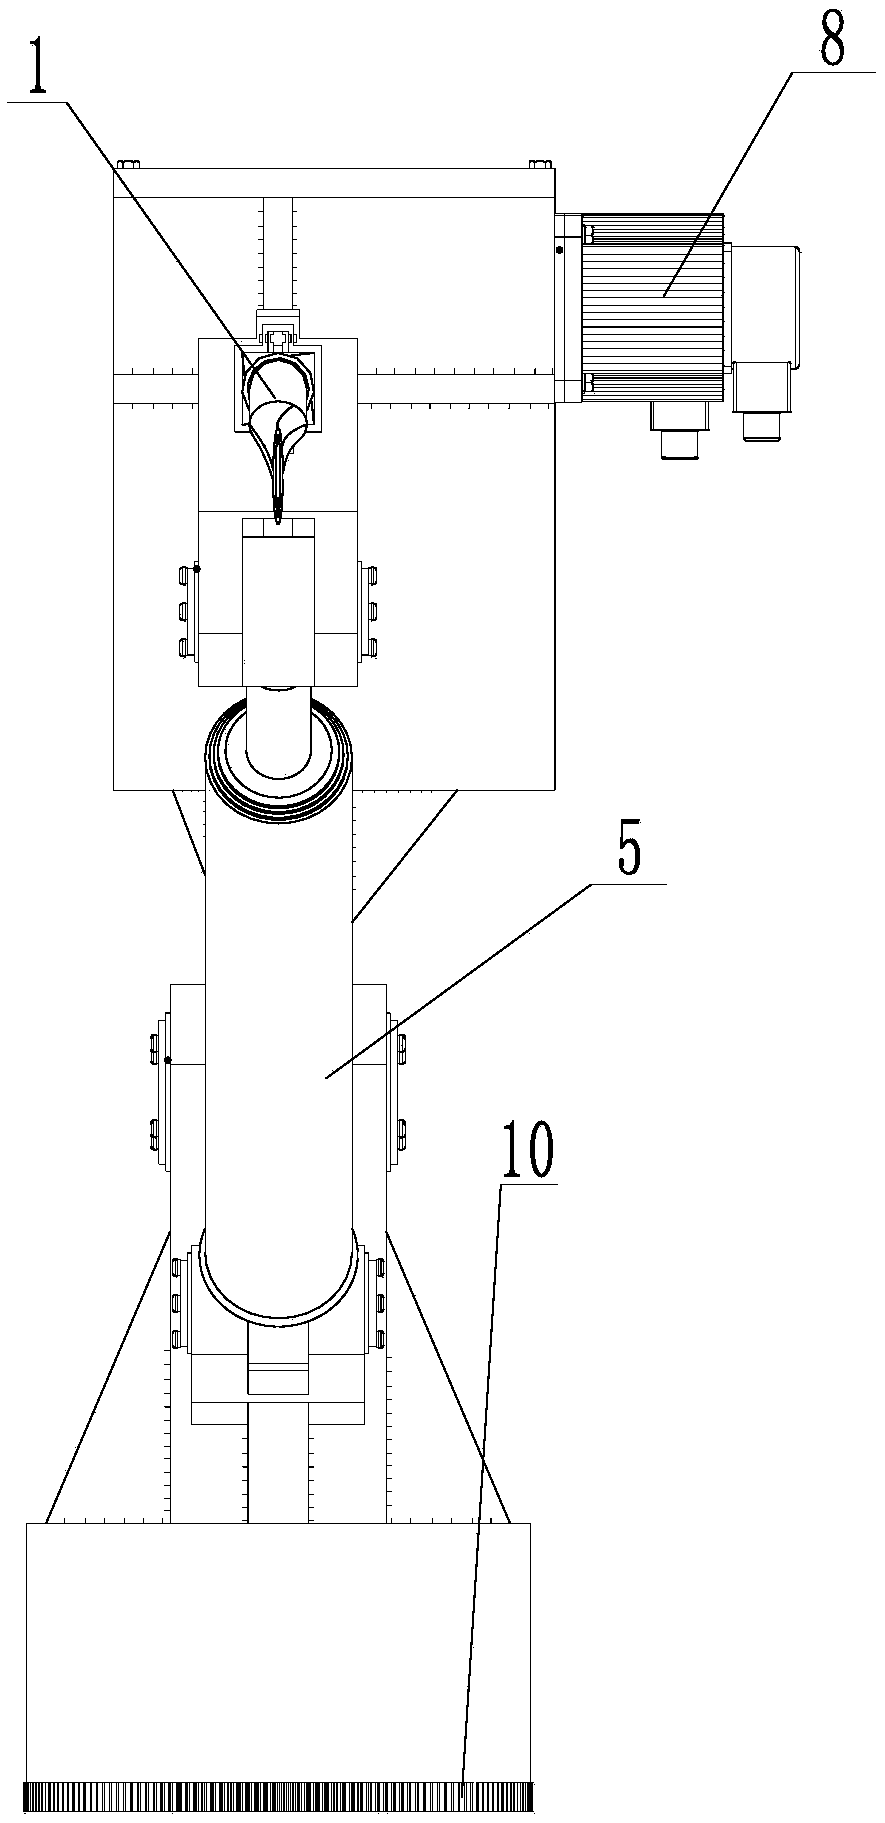 Electrically-driven multi-directional water-sprinkling pesticide-spraying execution device